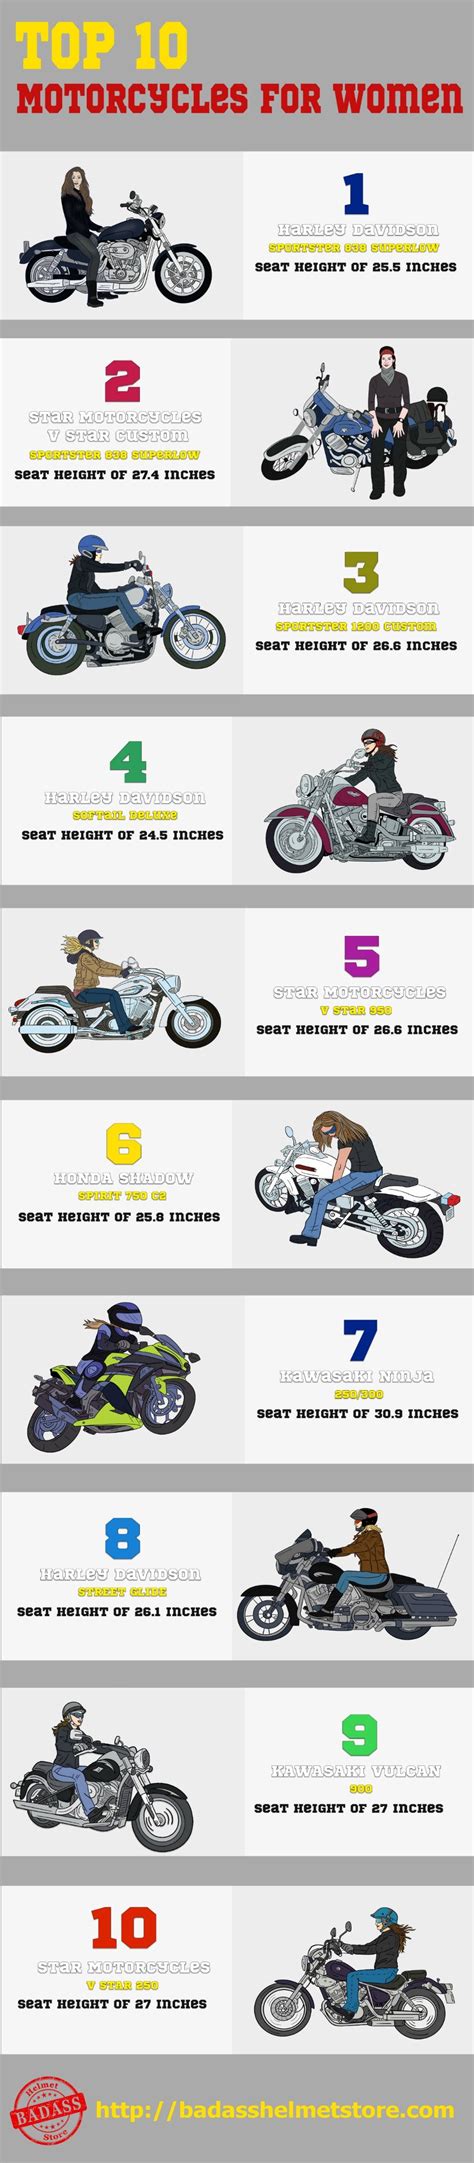 5 types of women that ride motorcycles infographic best motorcycle for women motorcycle